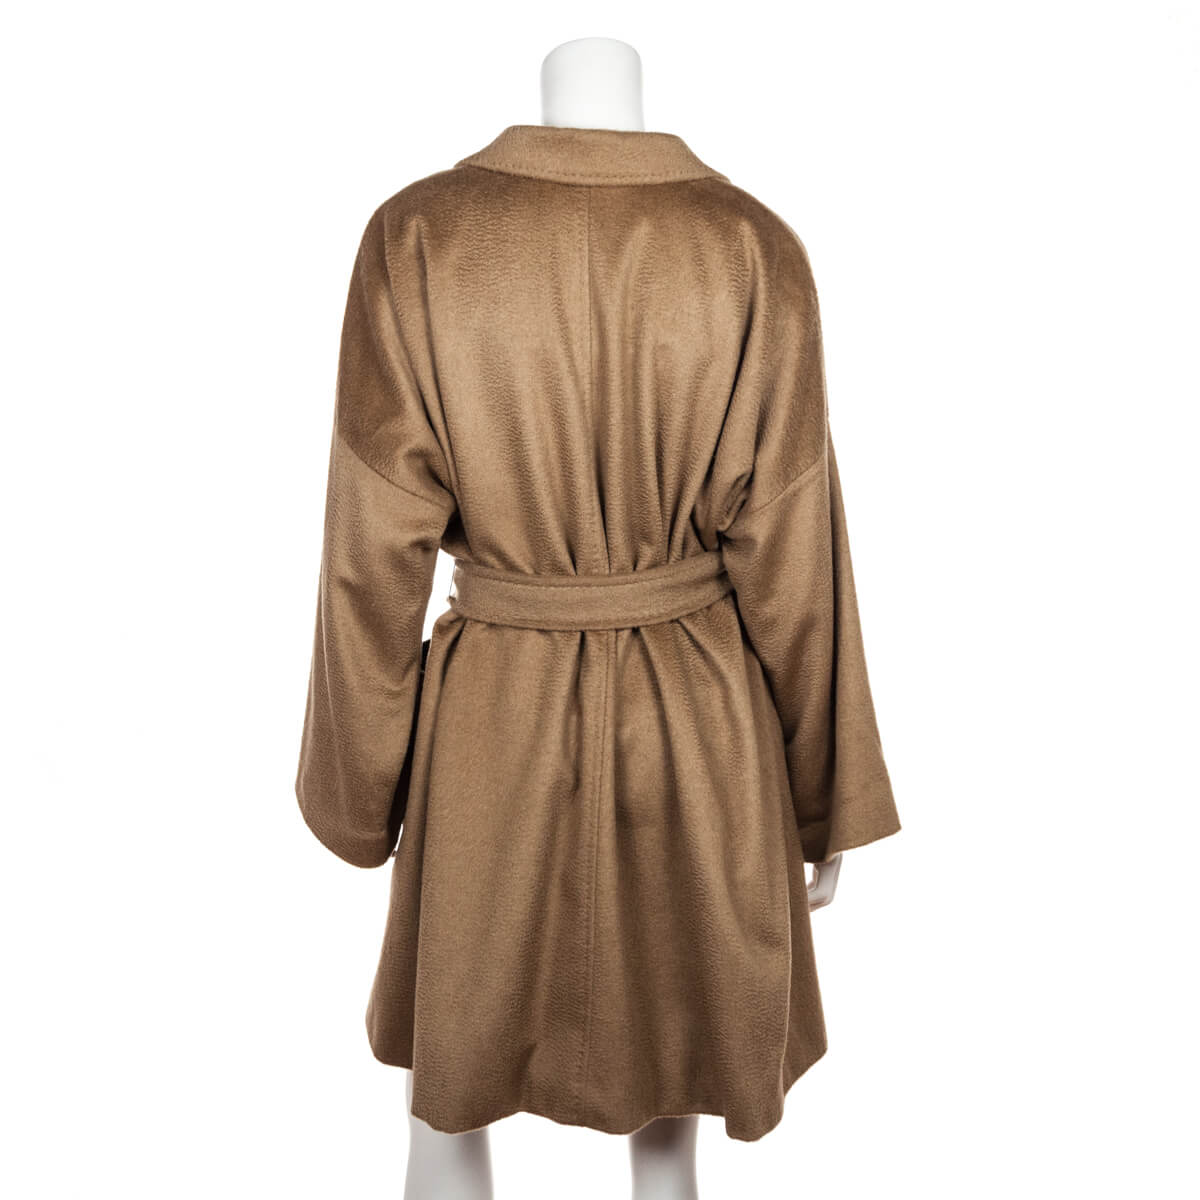 Max Mara Tan Camel Hair Belted Coat Size L | US 10 | IT 44 - Love that Bag etc - Preowned Authentic Designer Handbags & Preloved Fashions